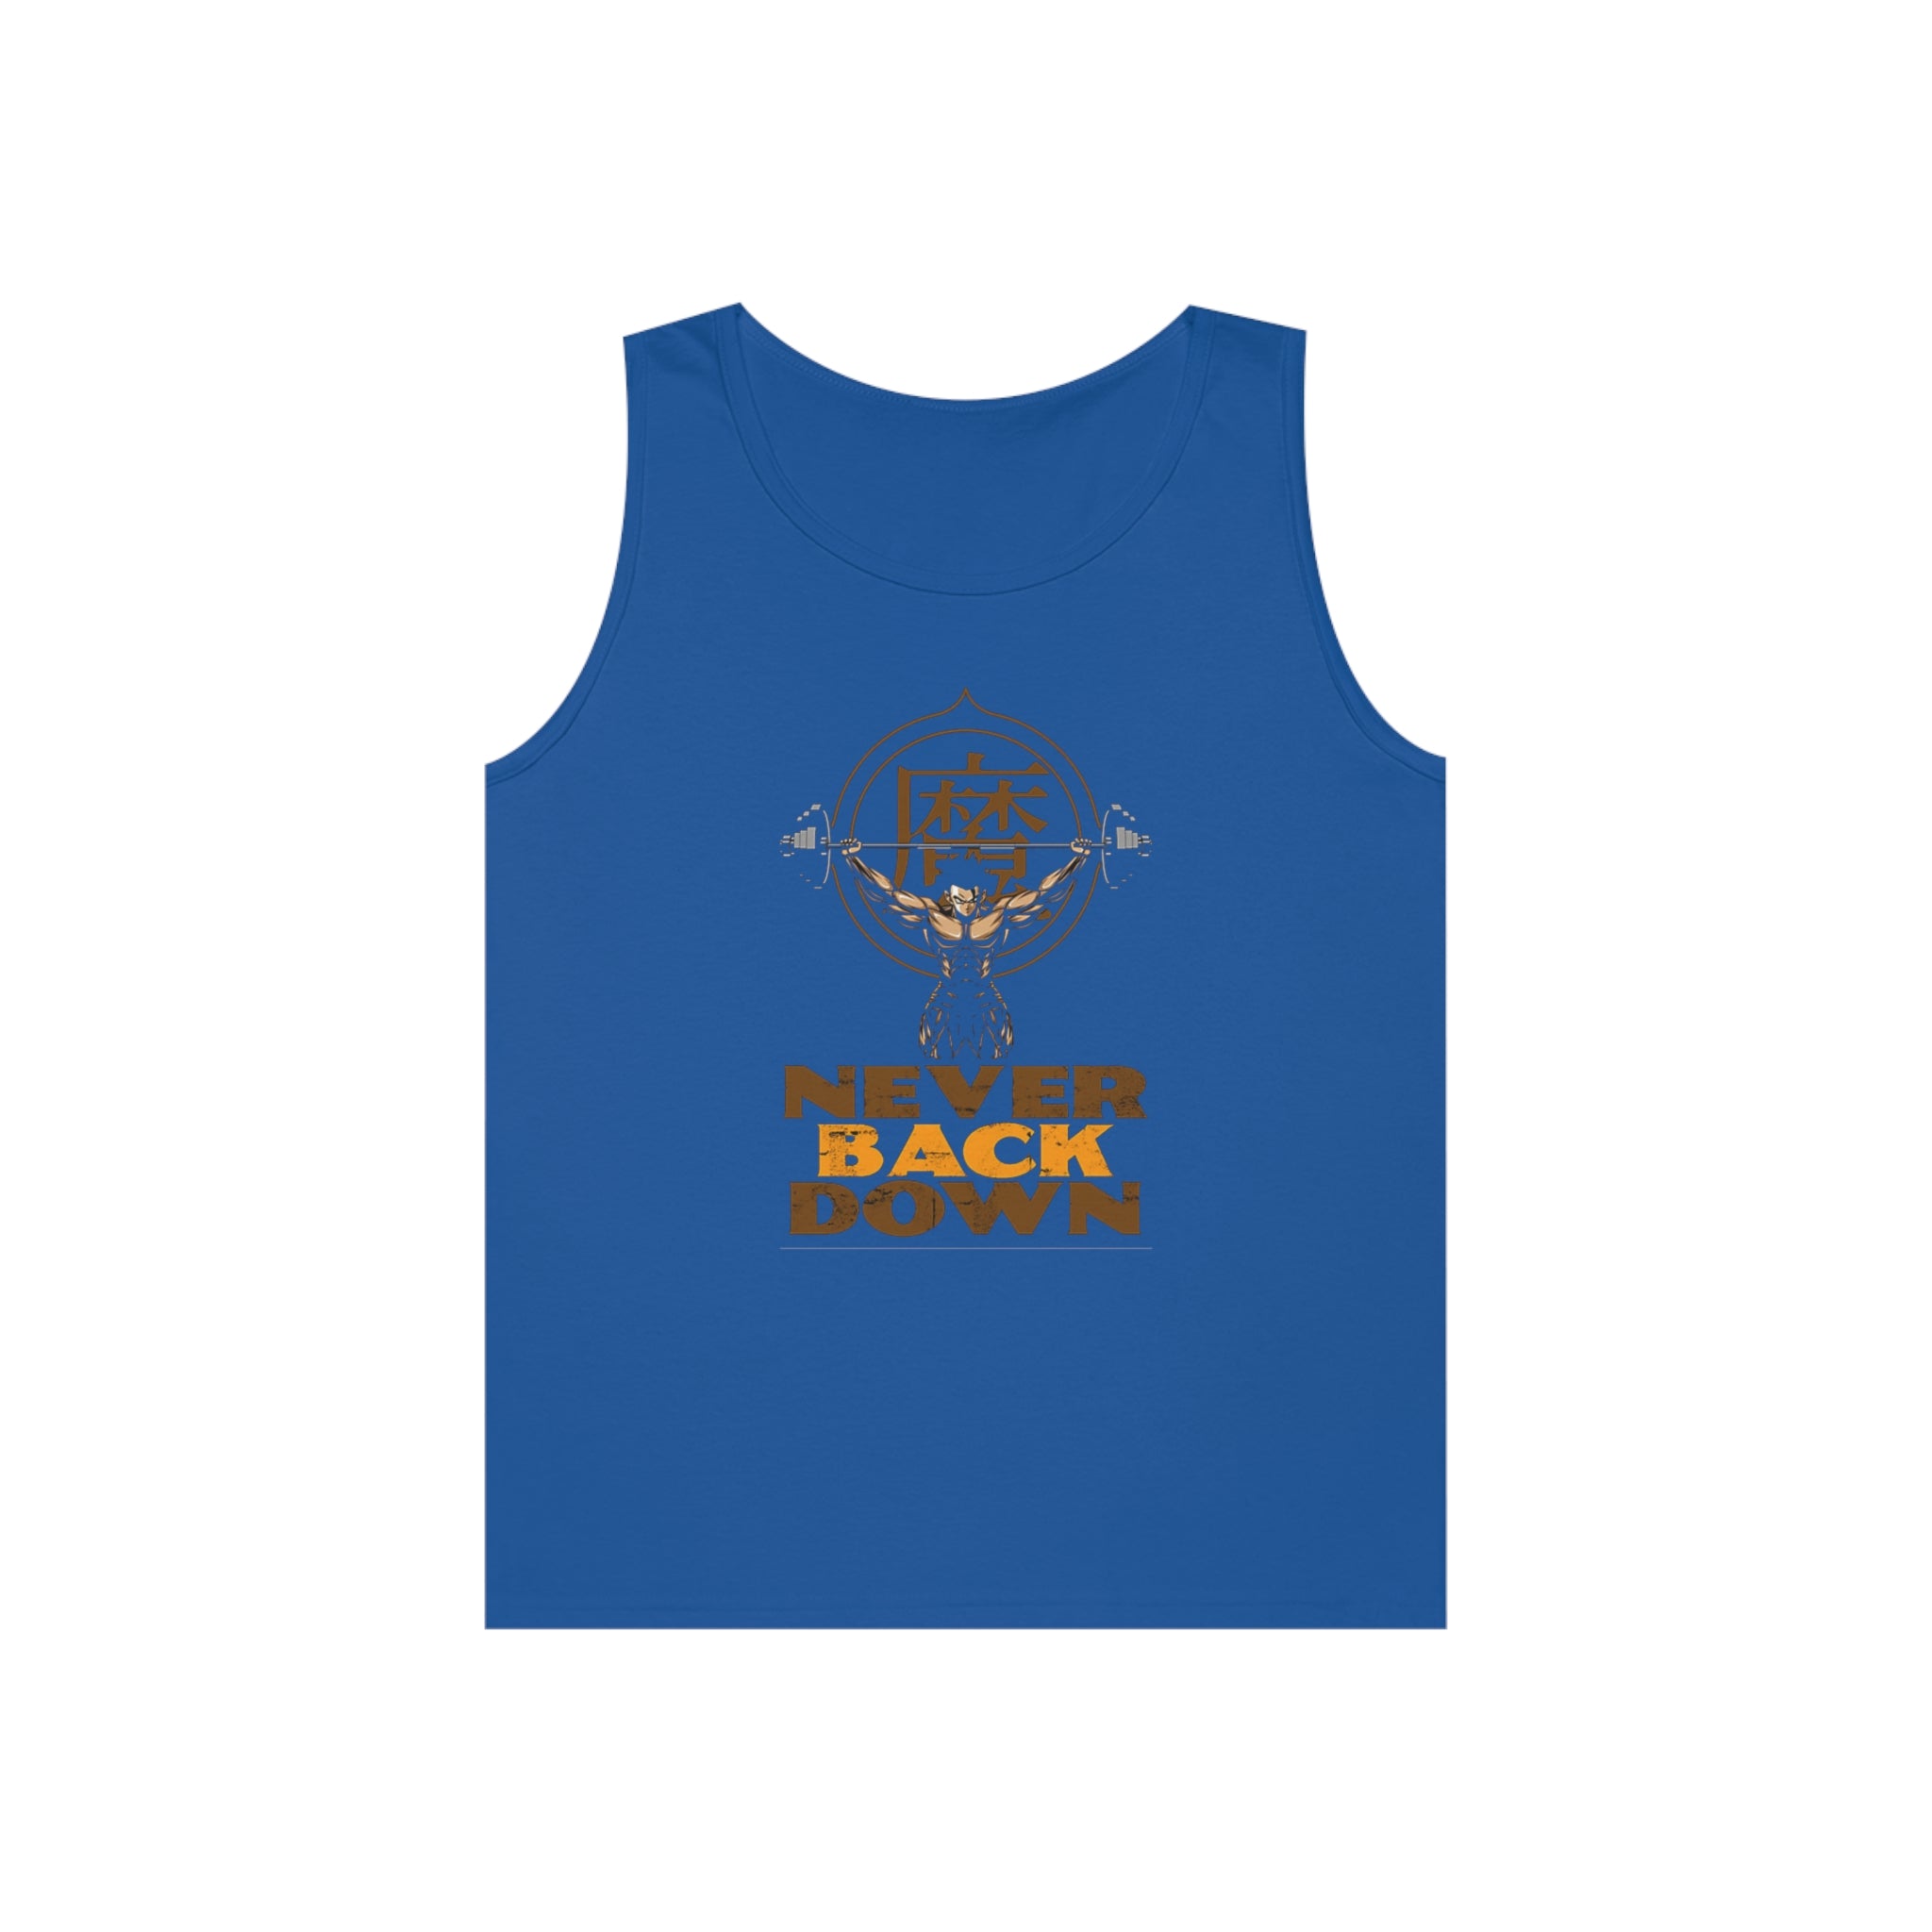 Never Back Down Tank Top